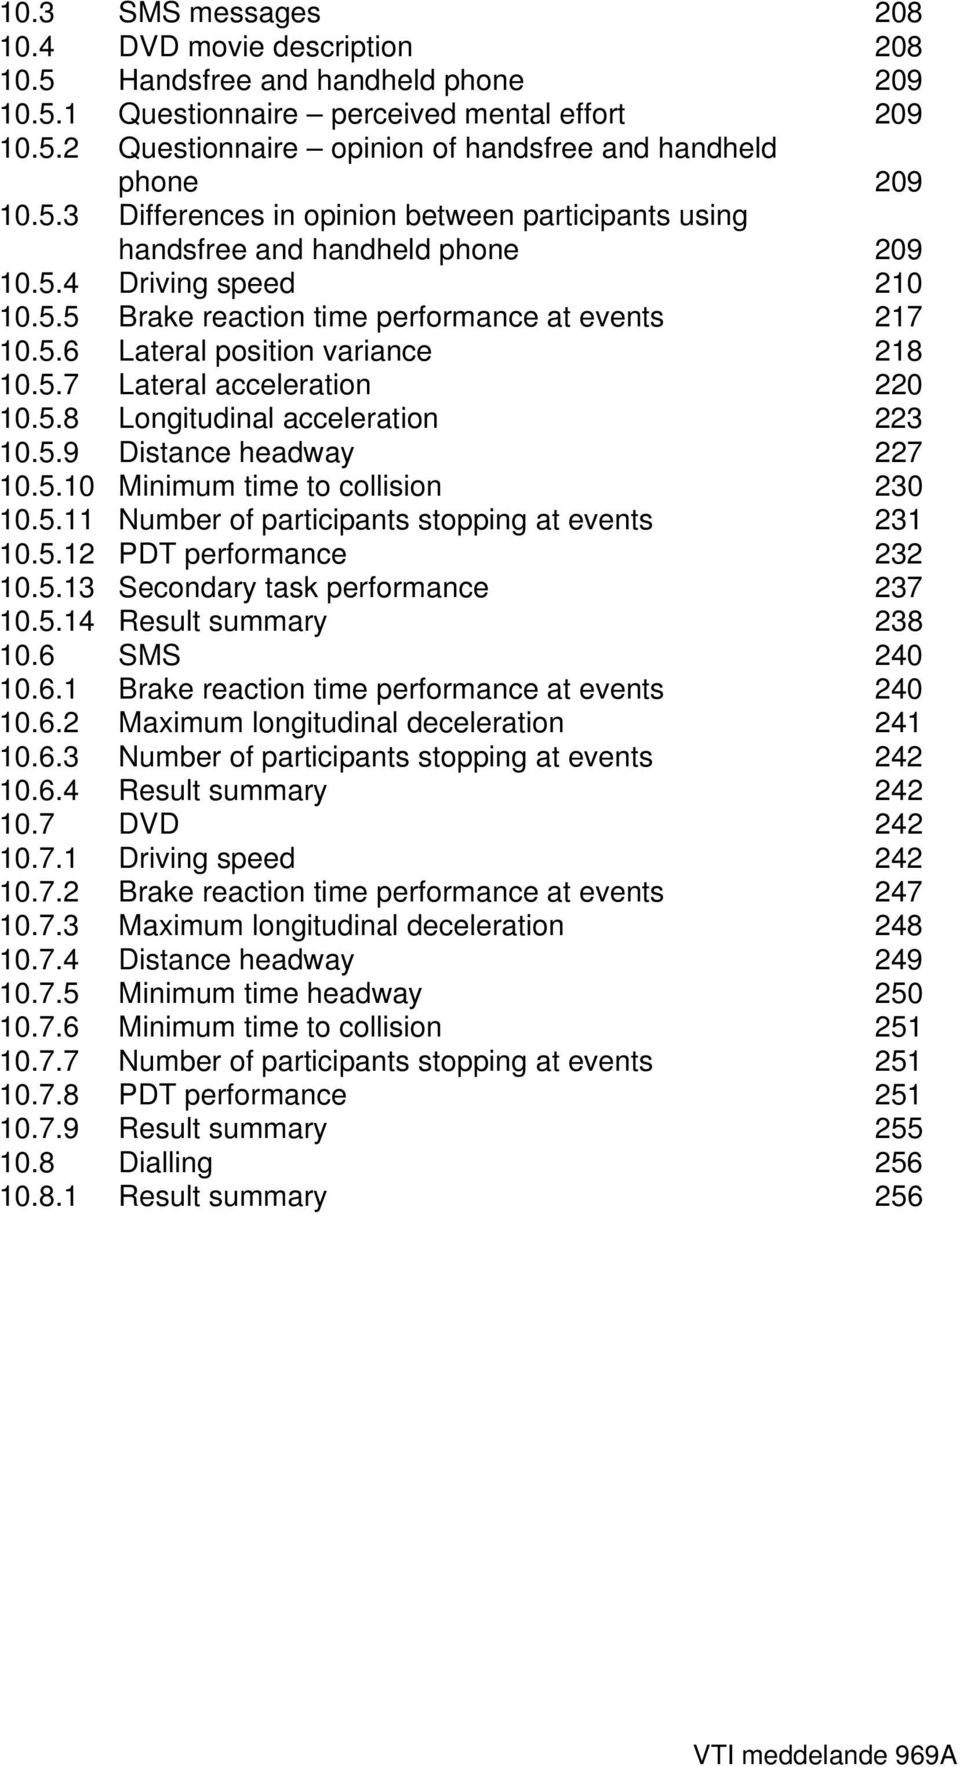 5.1 Minimum time to collision 23 1.5.11 Number of participants stopping at events 231 1.5.12 PDT performance 232 1.5.13 Secondary task performance 237 1.5.14 Result summary 238 1.6 